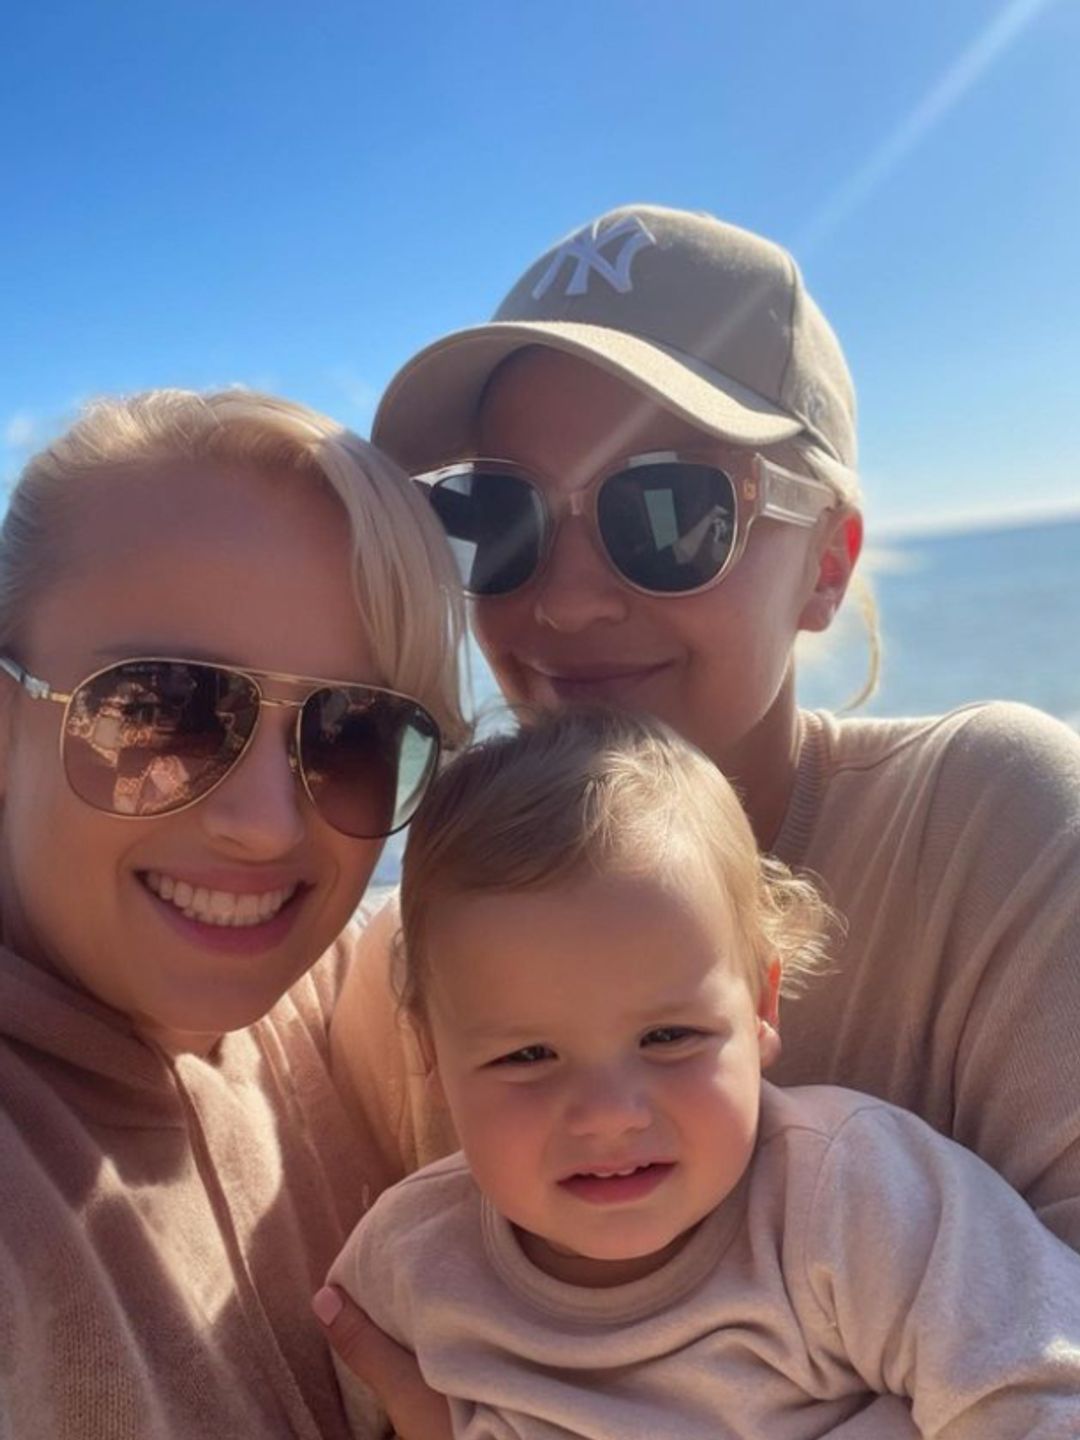 Rebel Wilson and her fiancee with their daughter